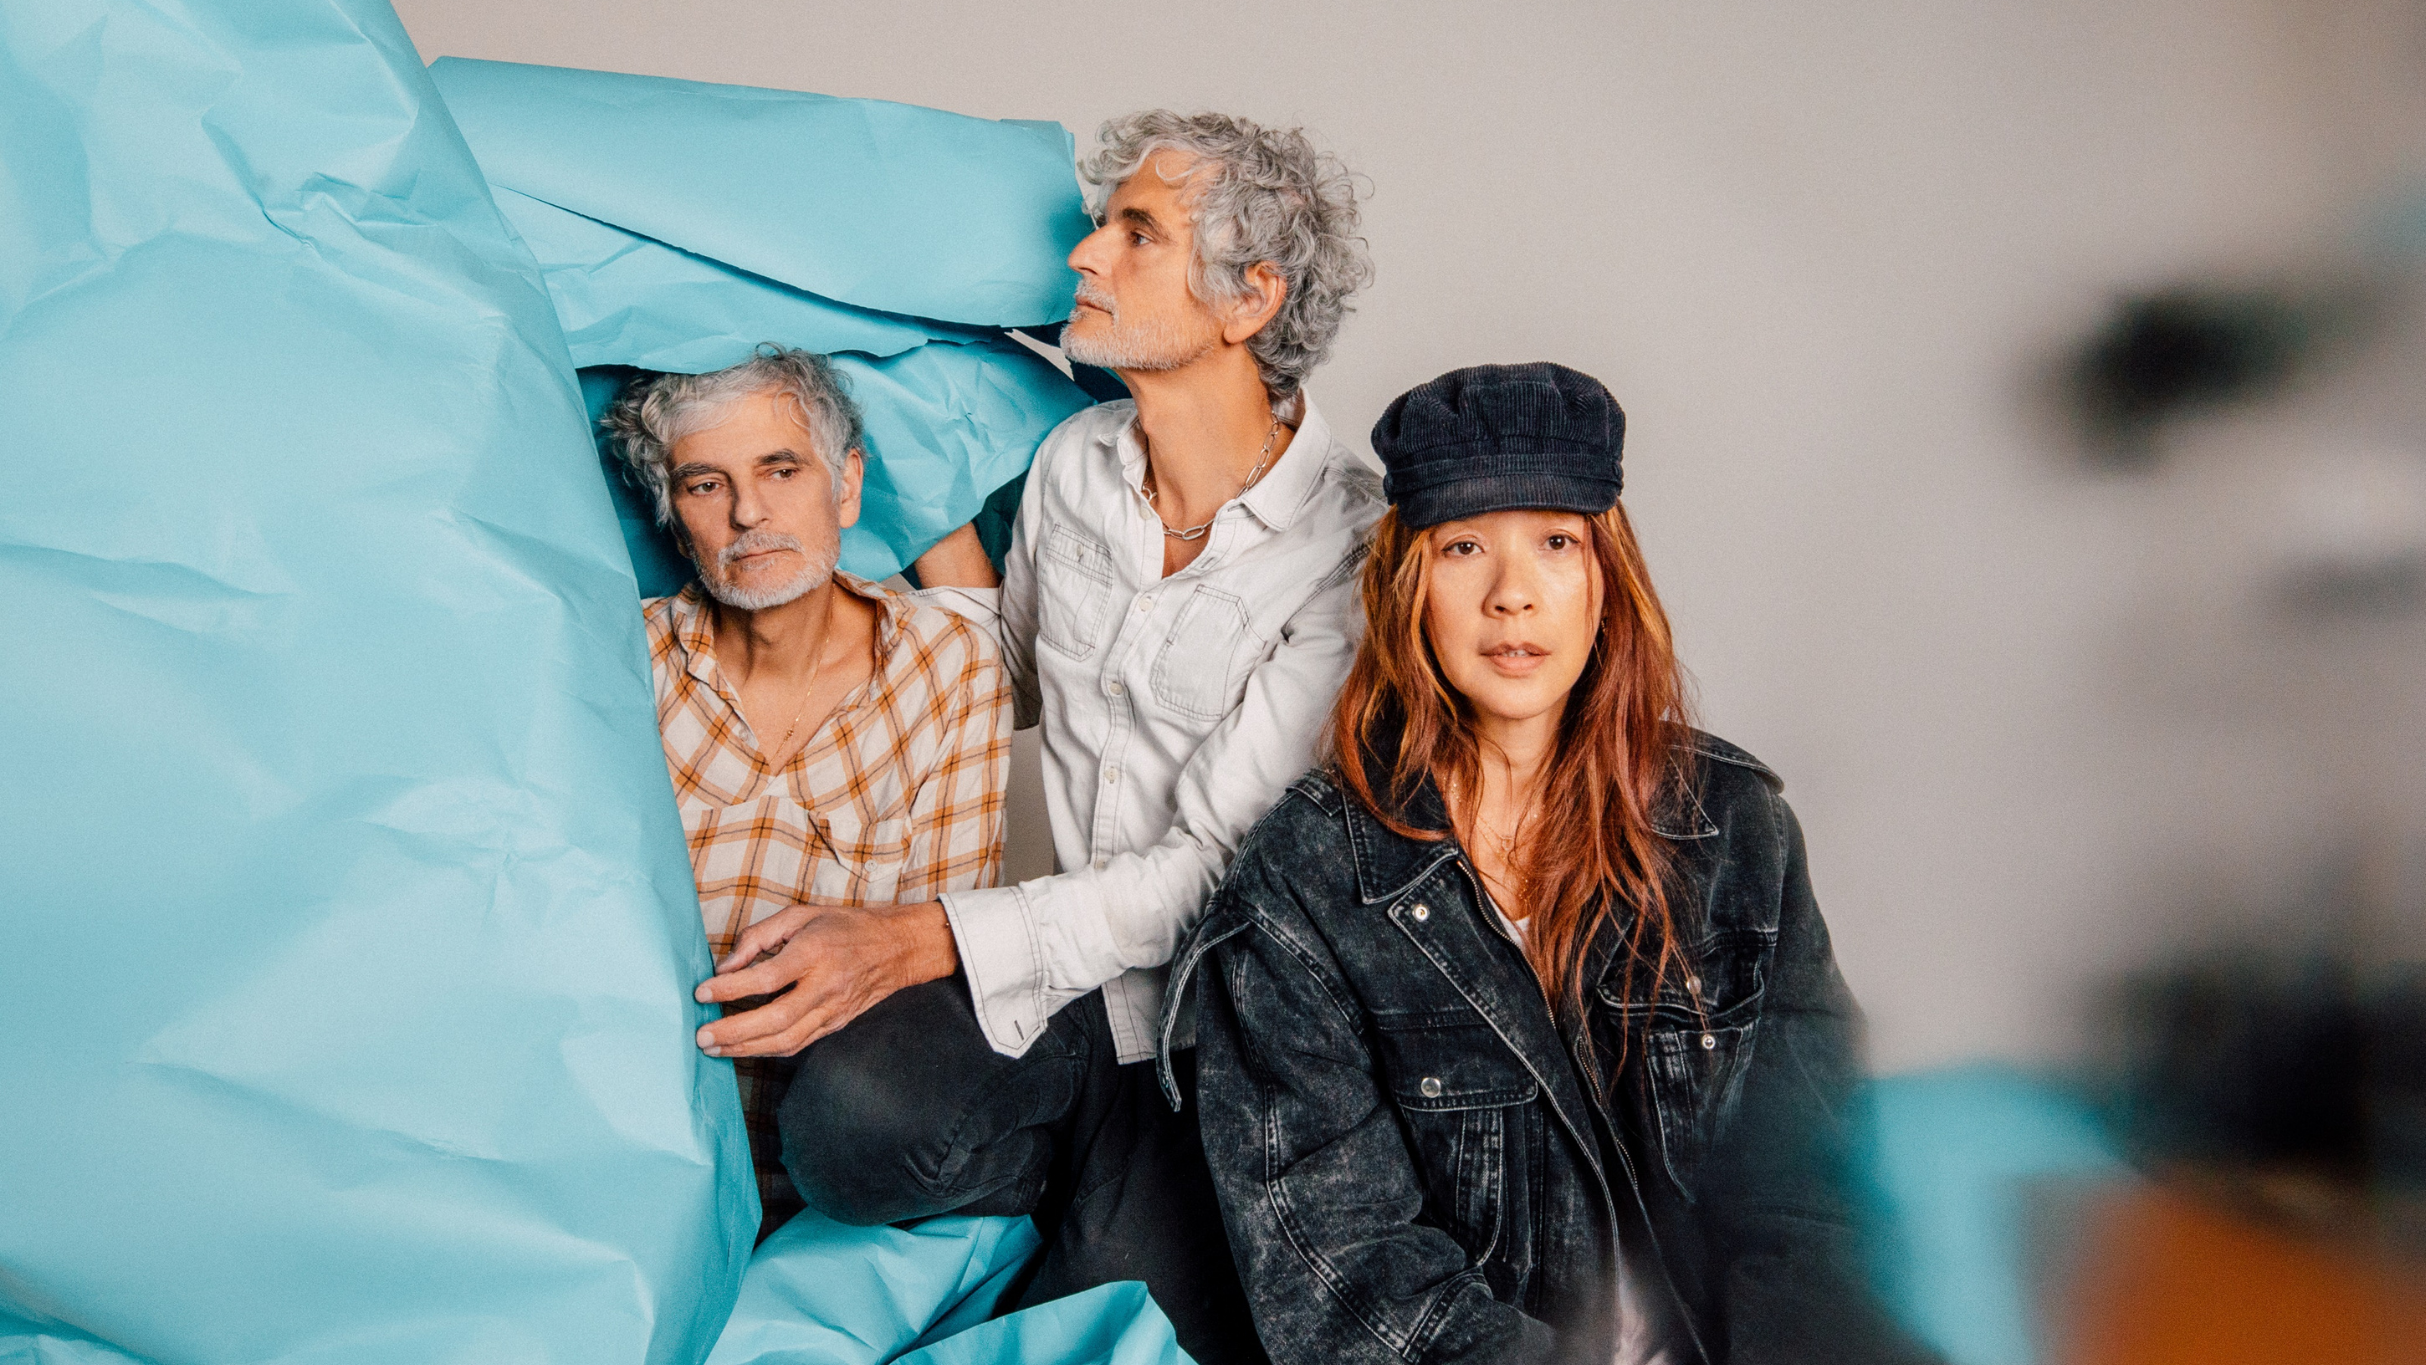 Blonde Redhead in Woolloongabba promo photo for Exclusive presale offer code